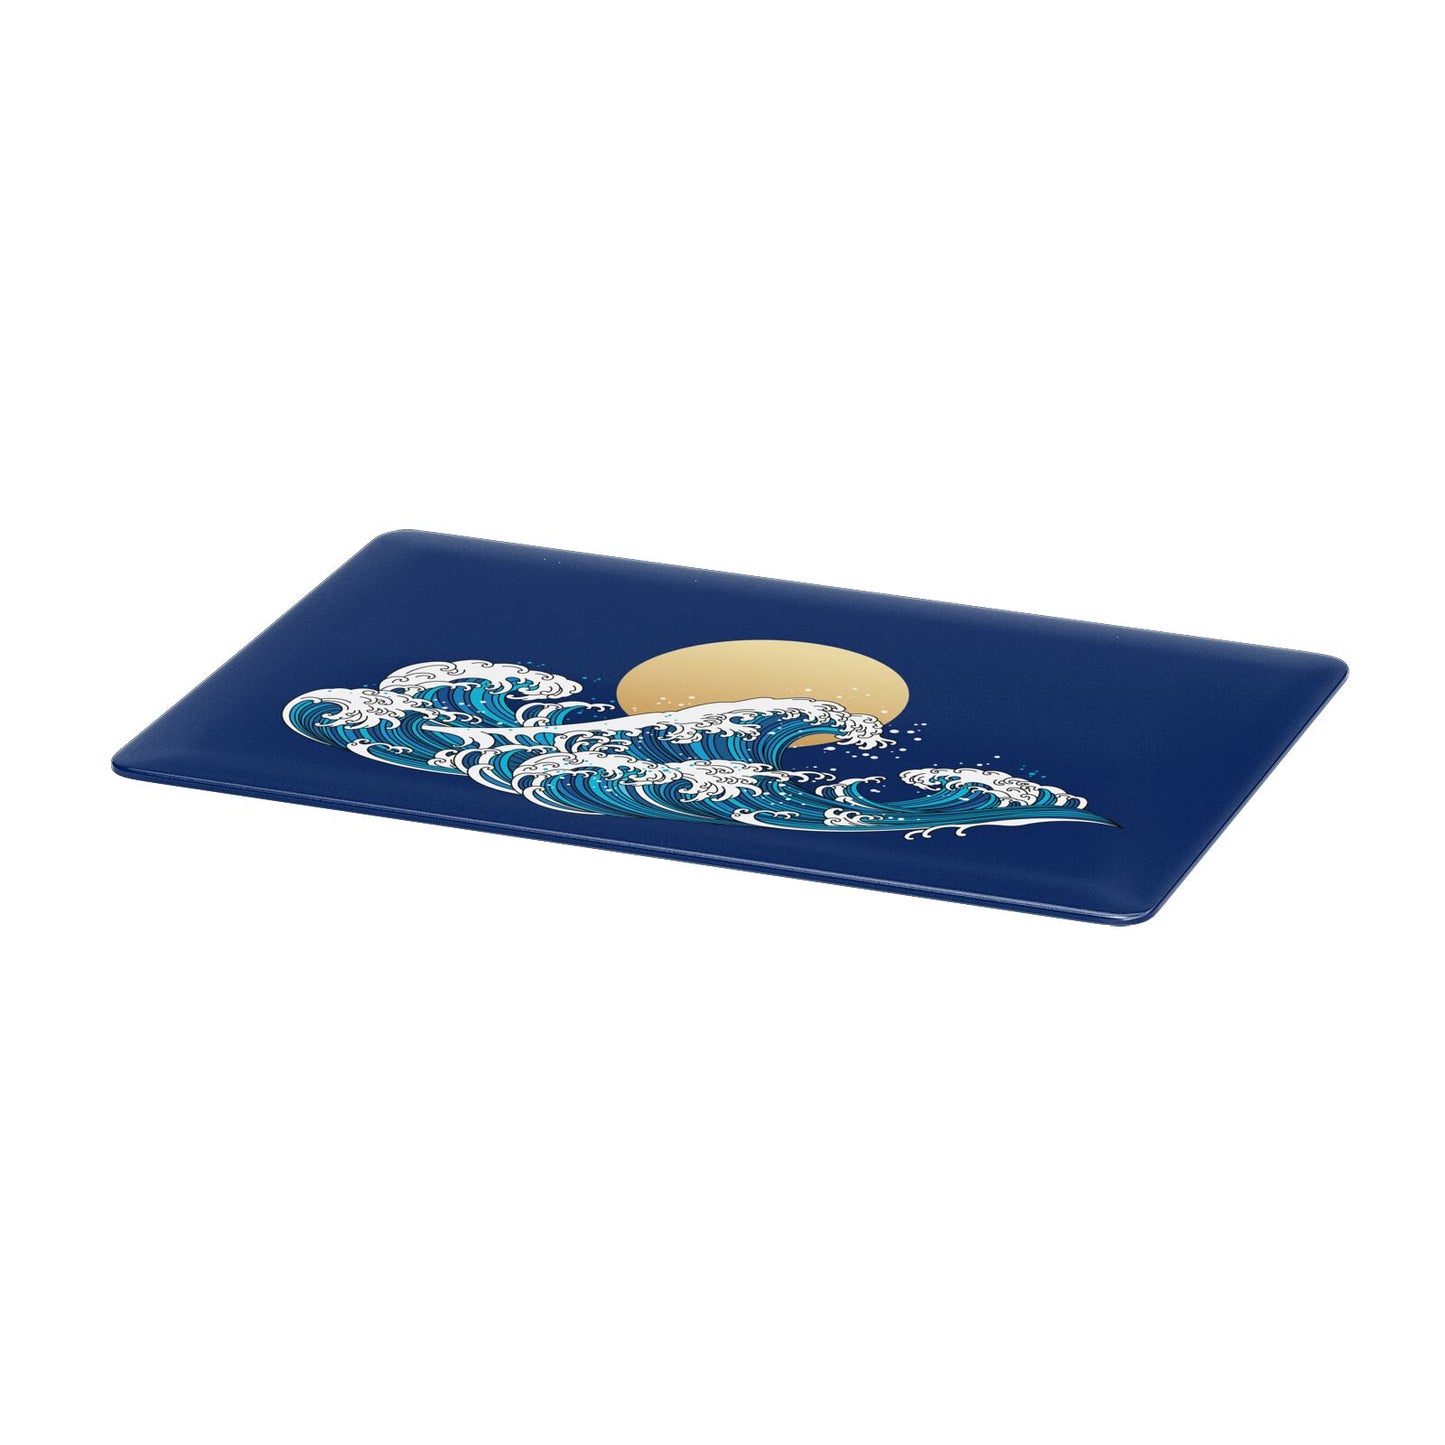 Hokusai Japanese Waves Apple MacBook Case Only